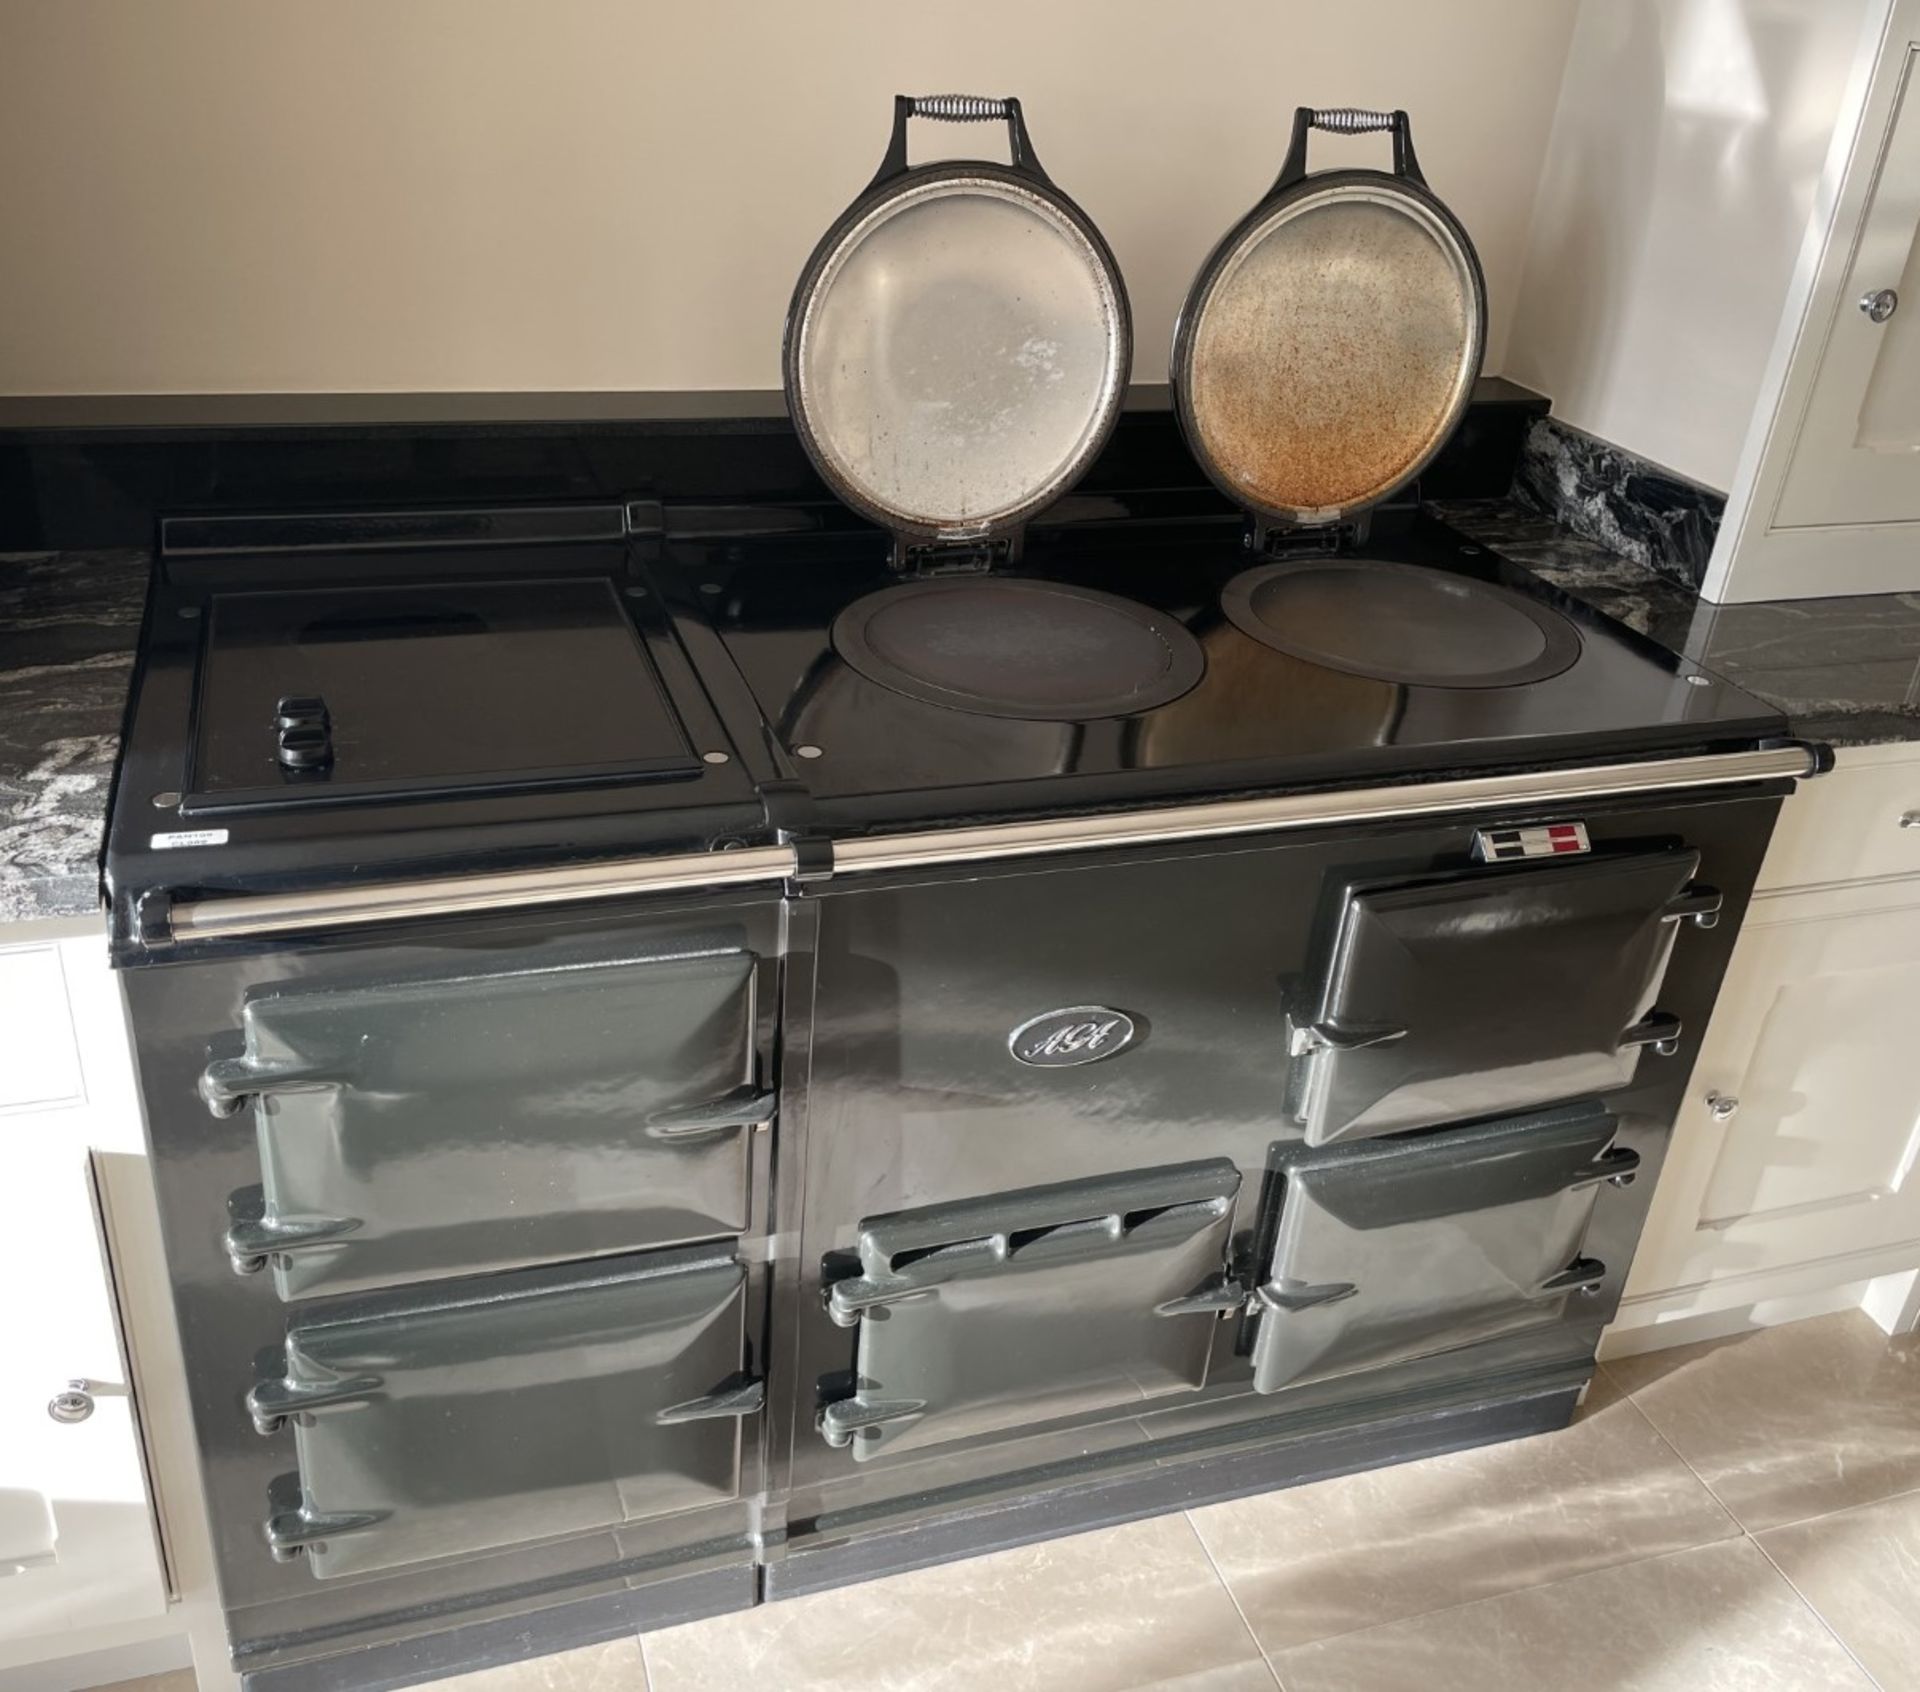 1 x AGA 4-Oven Electric Range Cooker With 2 Hot Plates, in Grey - NO VAT ON THE HAMMER